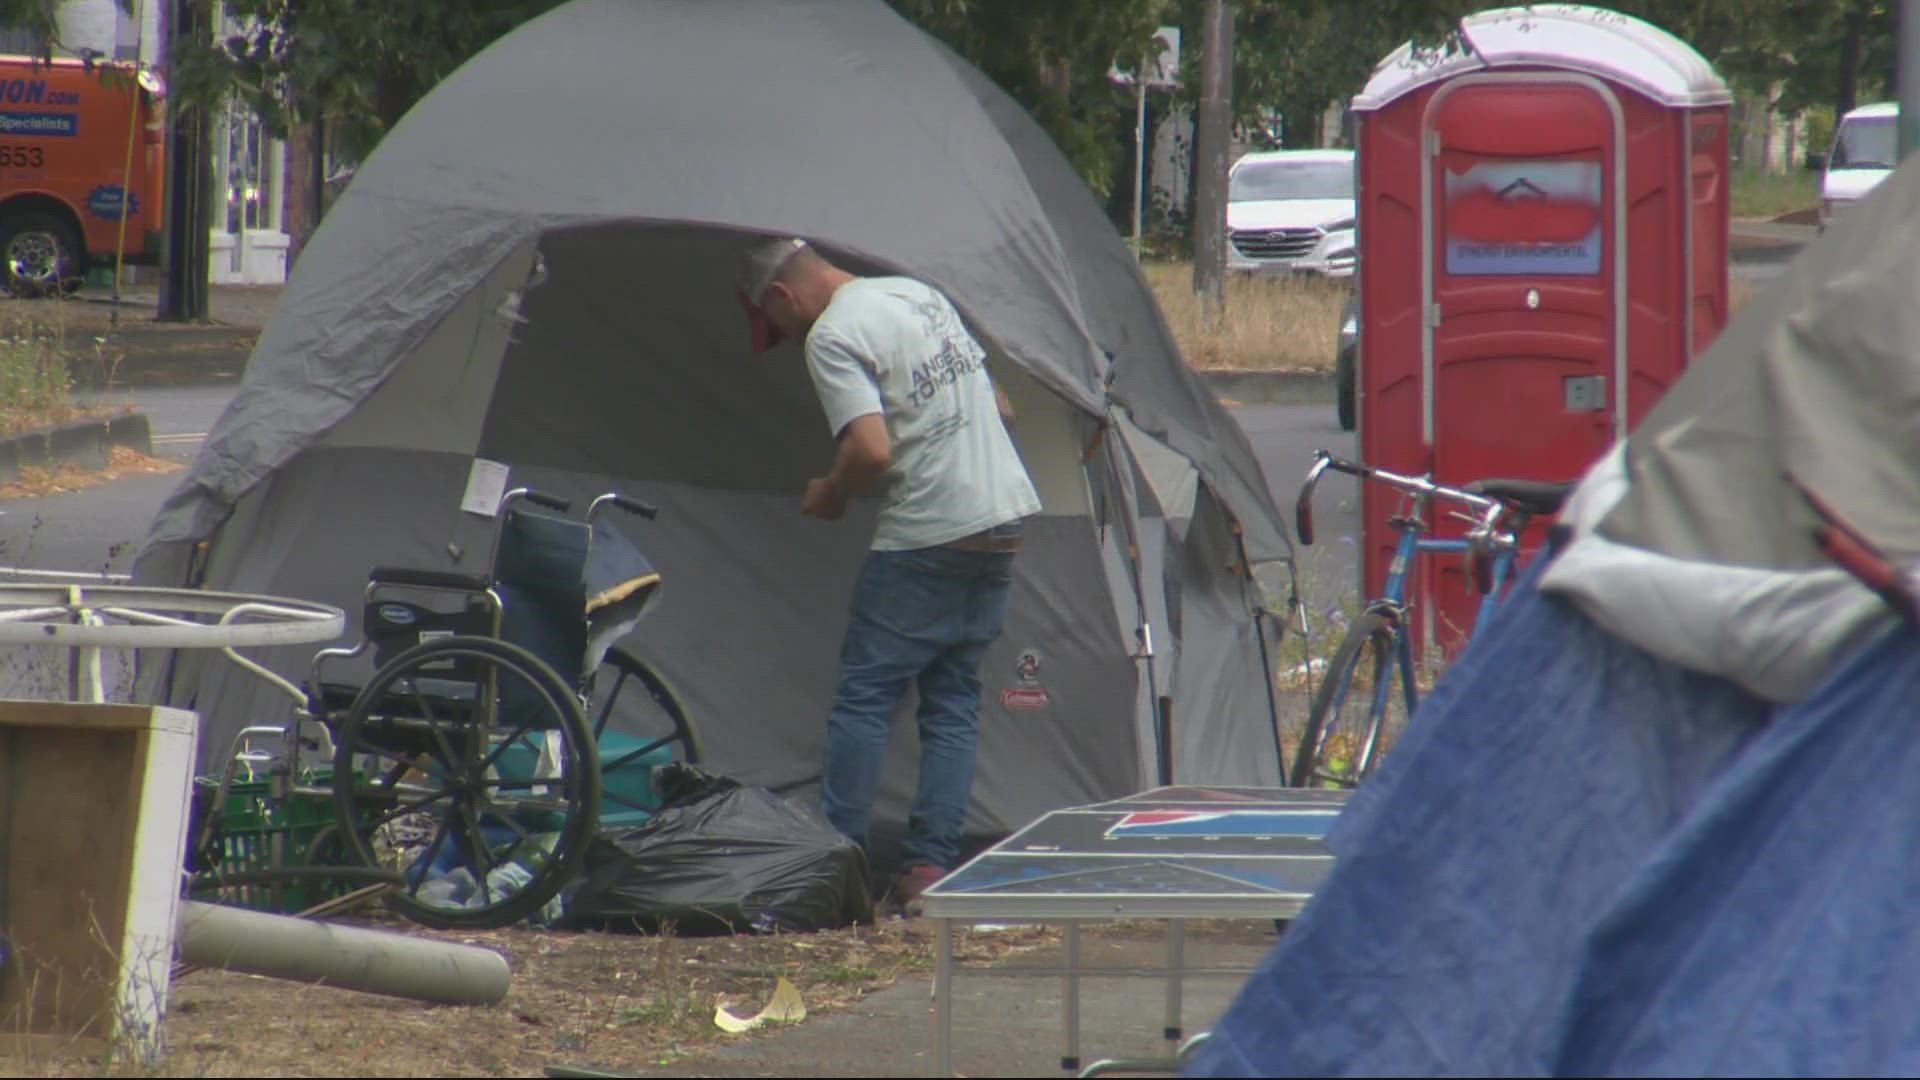 The annual Point-In-Time Count is back after being postponed because of the pandemic. KGW's Bryant Clerkley explains how it works.